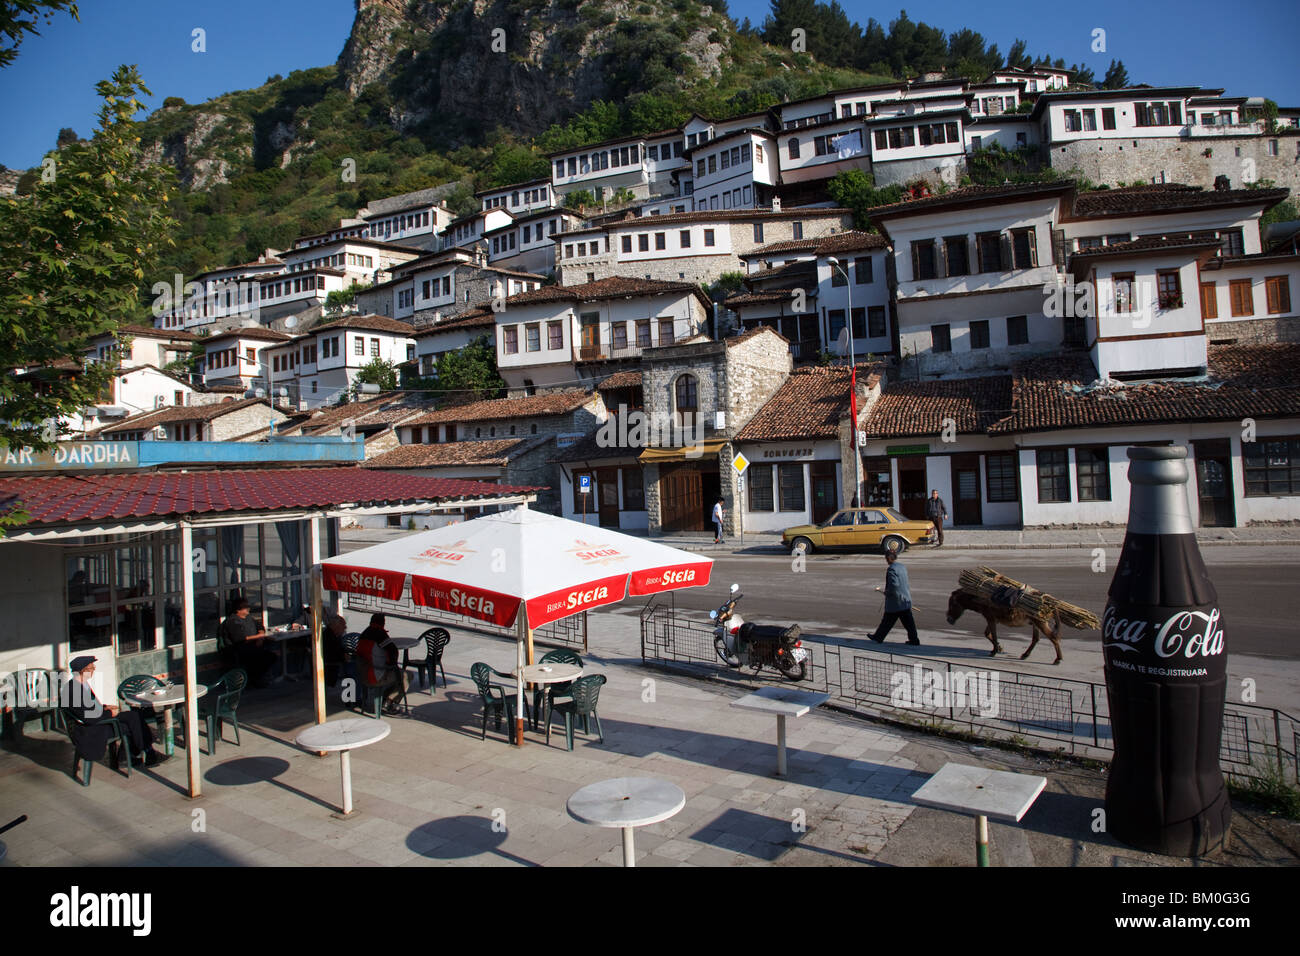 A local cafe on a large Coca Cola advert in Berat, Albania. Stock Photo